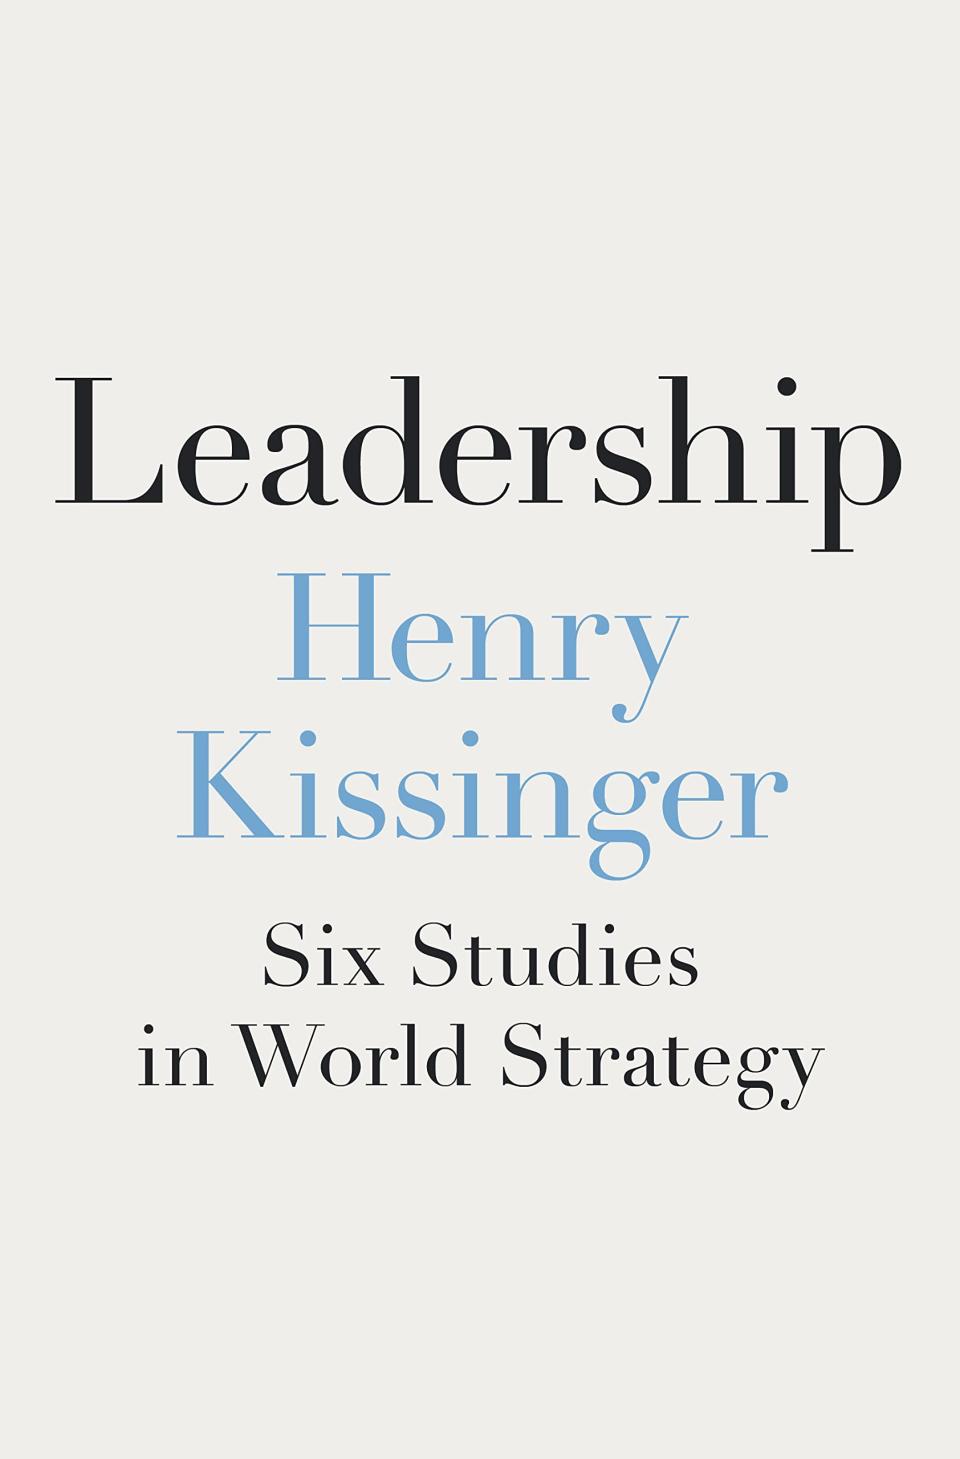 "Leadership: Six Studies in World Strategy" by Henry Kissinger publishes on July 5, 2022.